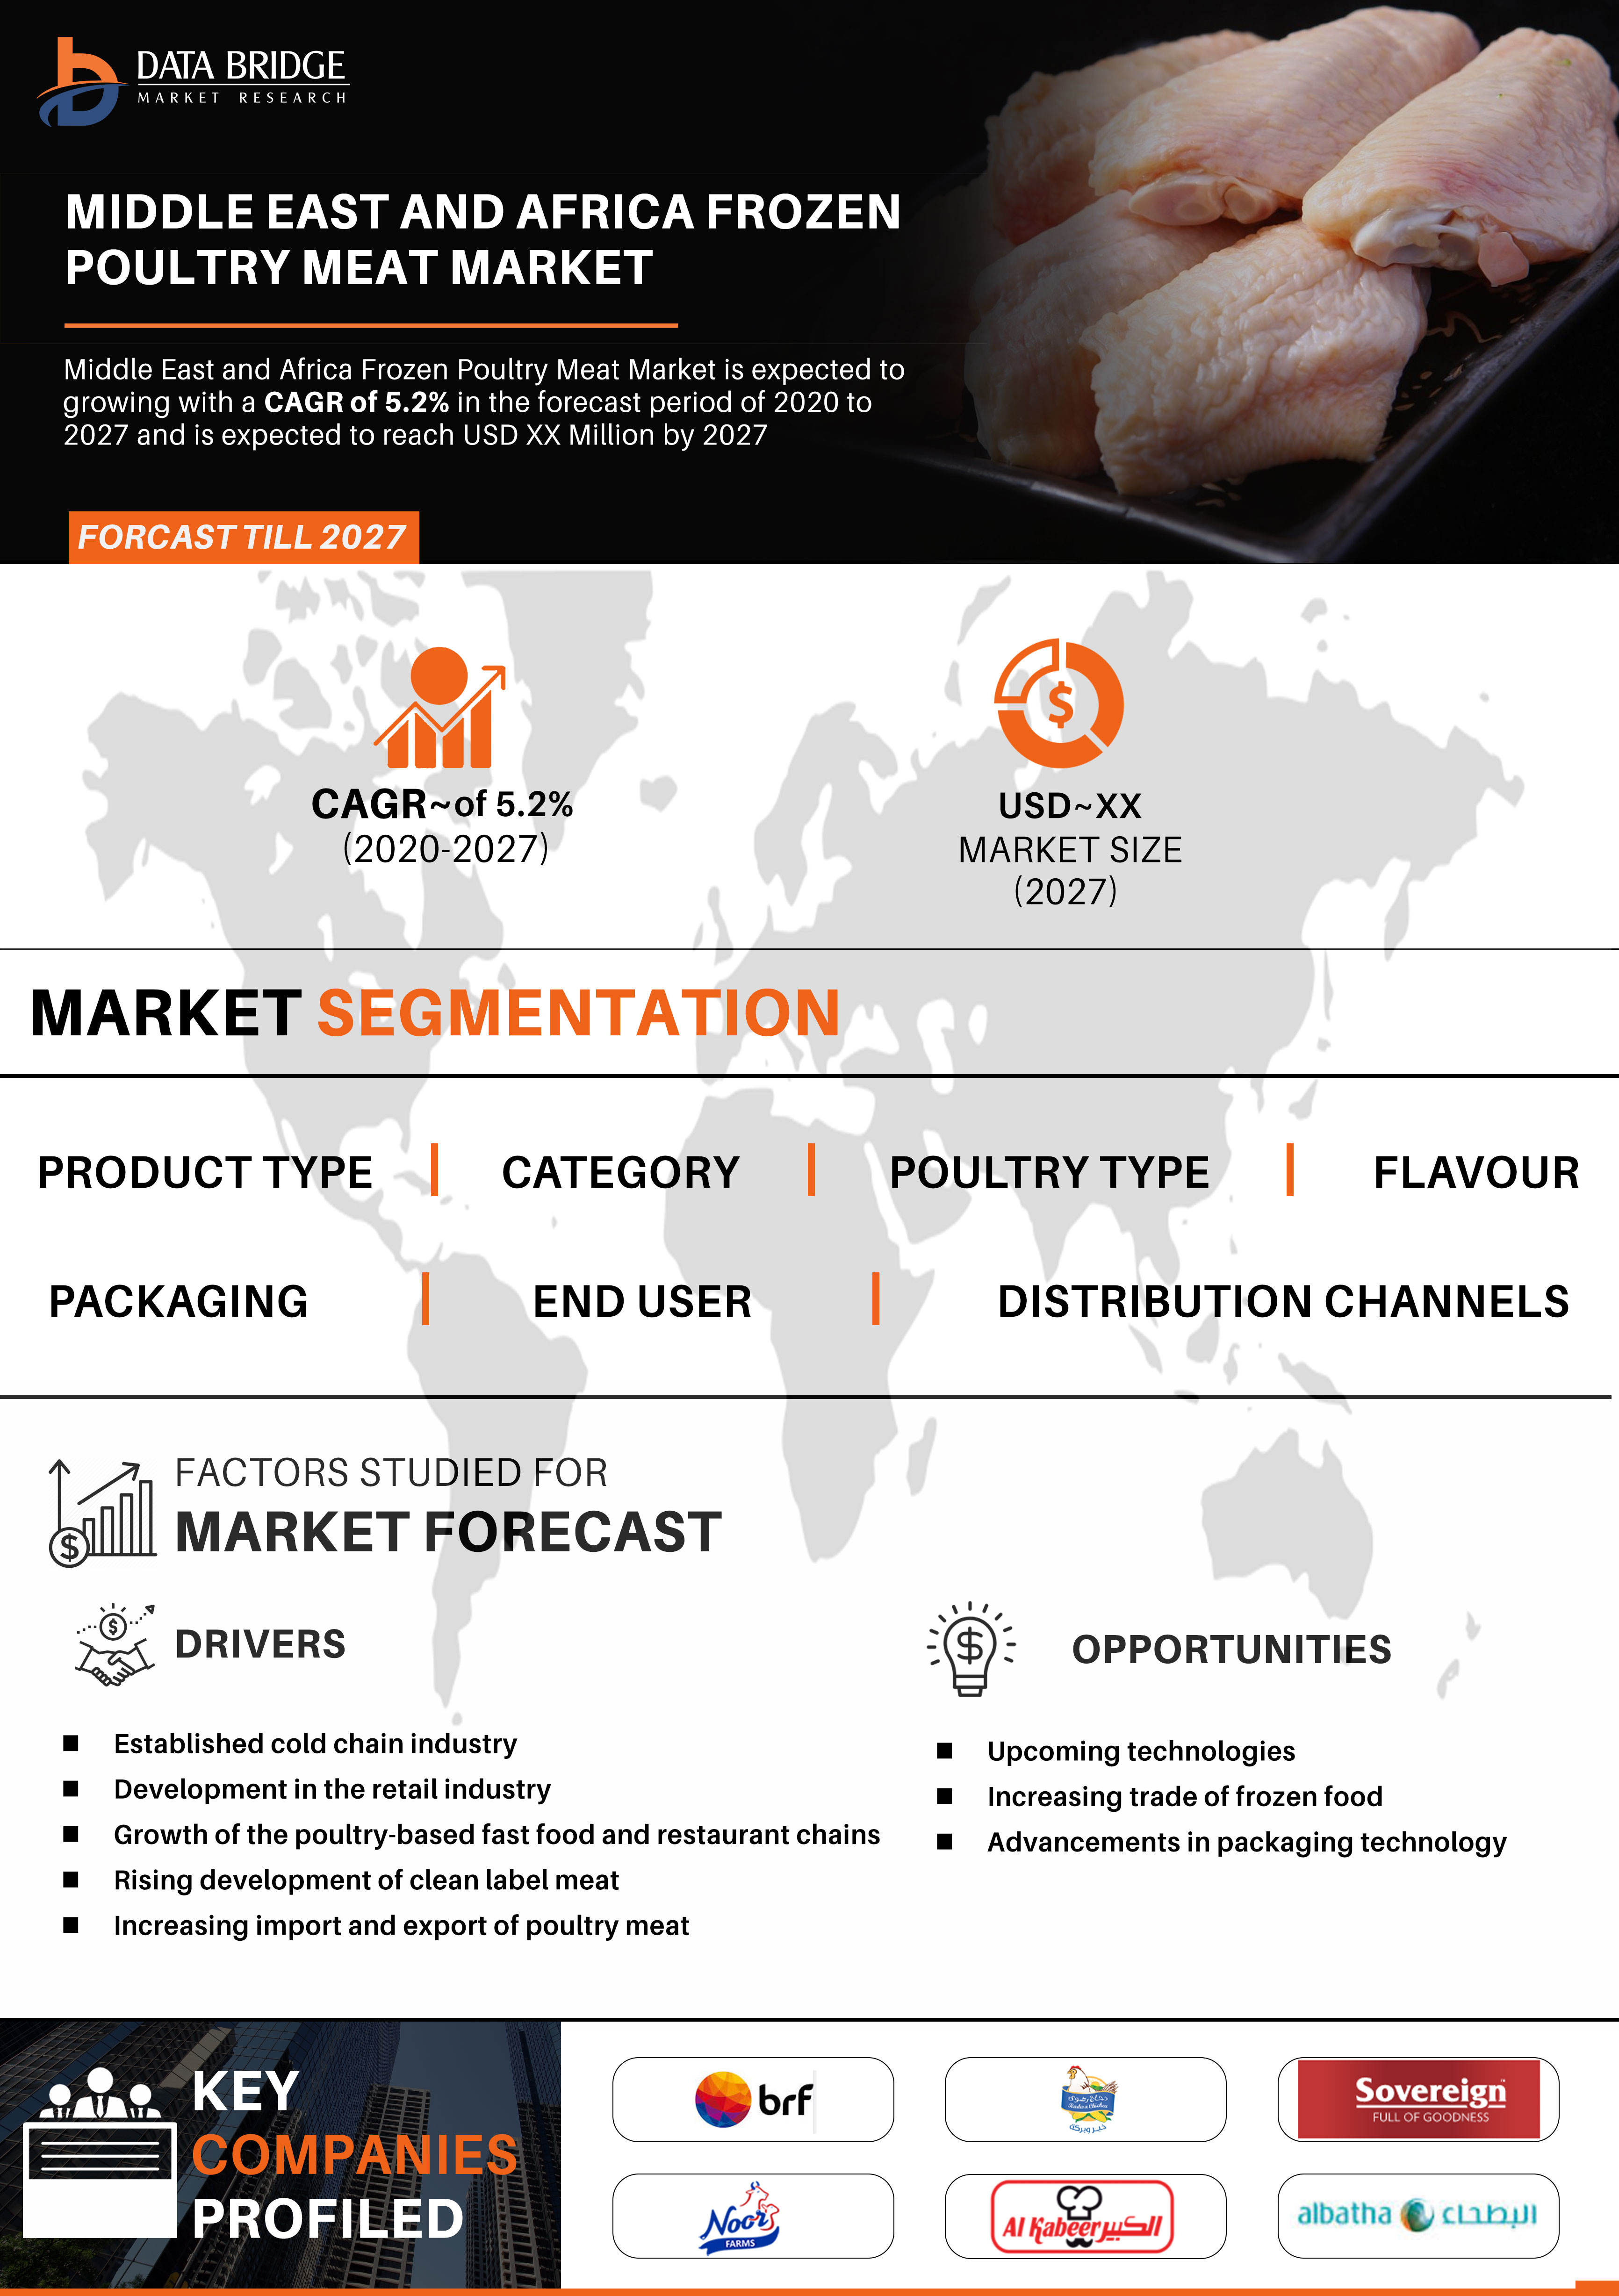 Middle East and Africa Frozen Poultry Meat Market